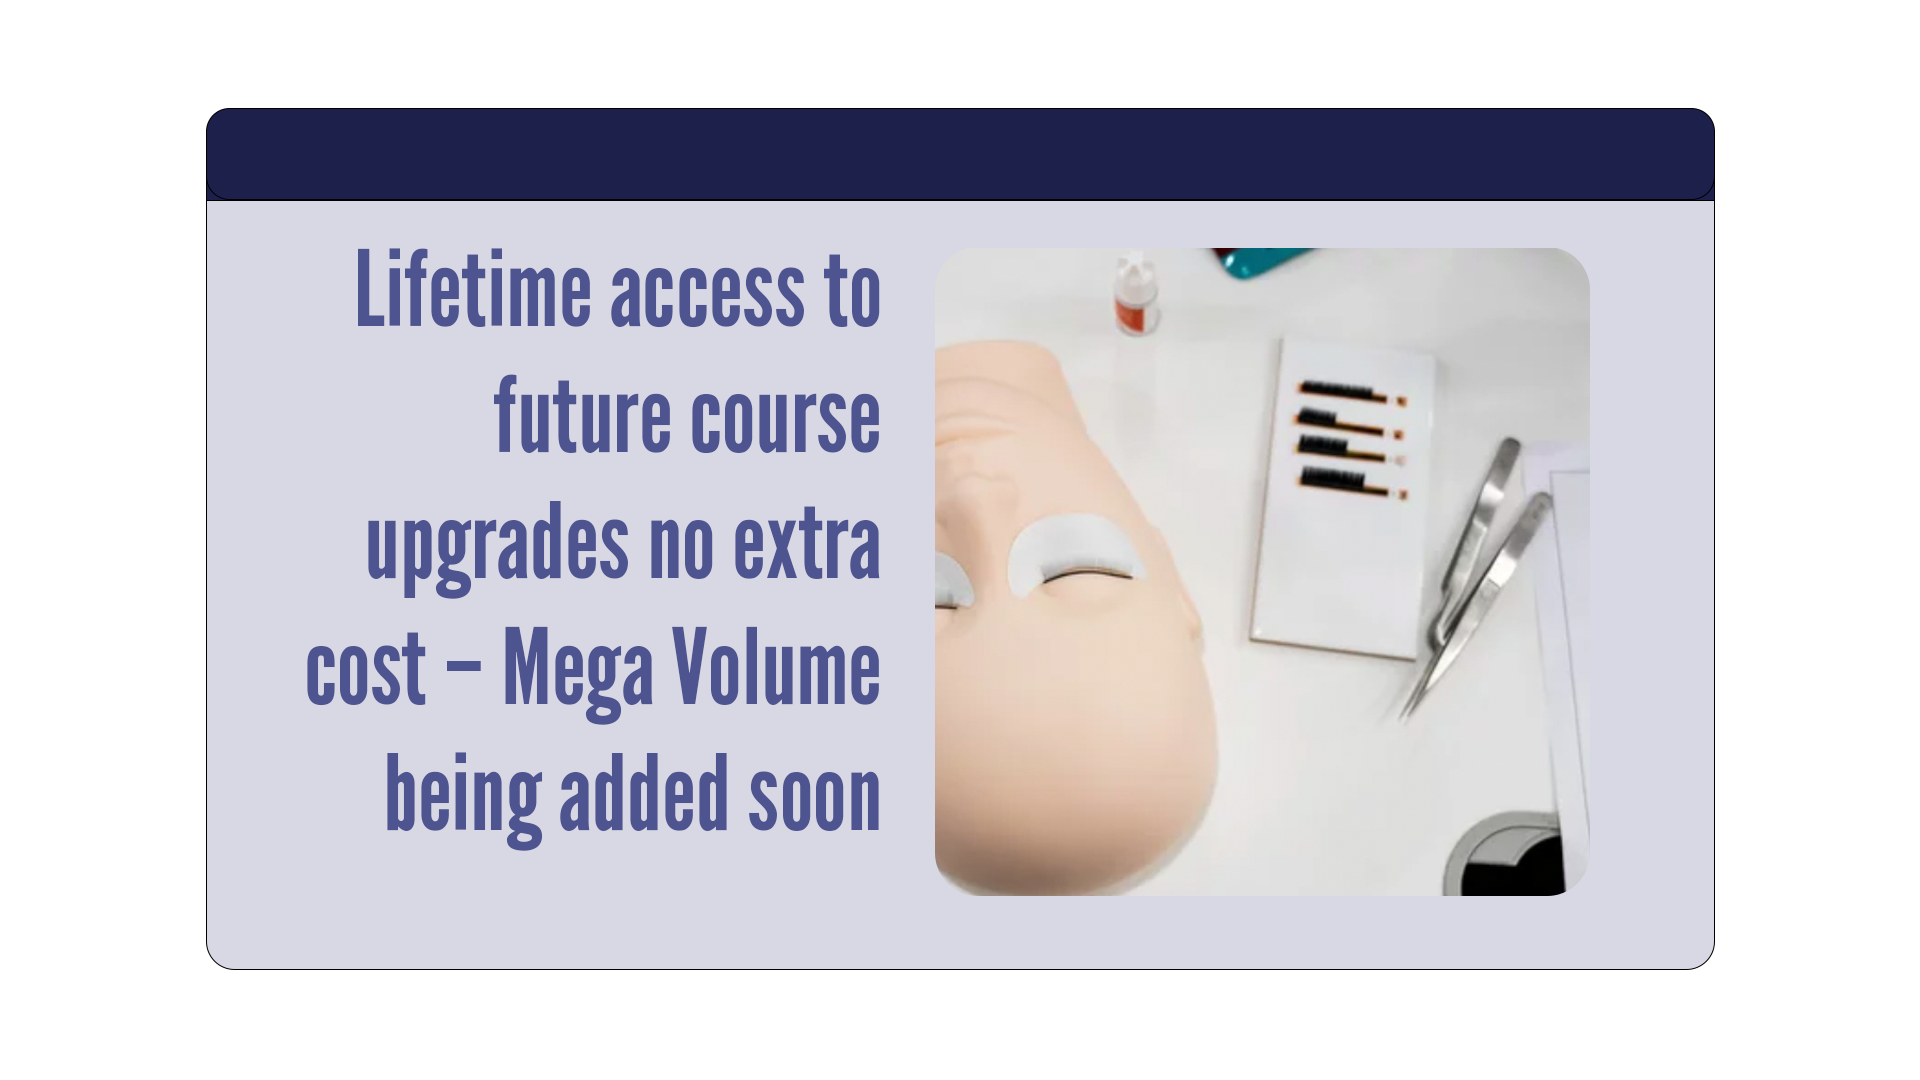 Lifetime access to future course upgrades no extra cost - Mega Volume being added soon